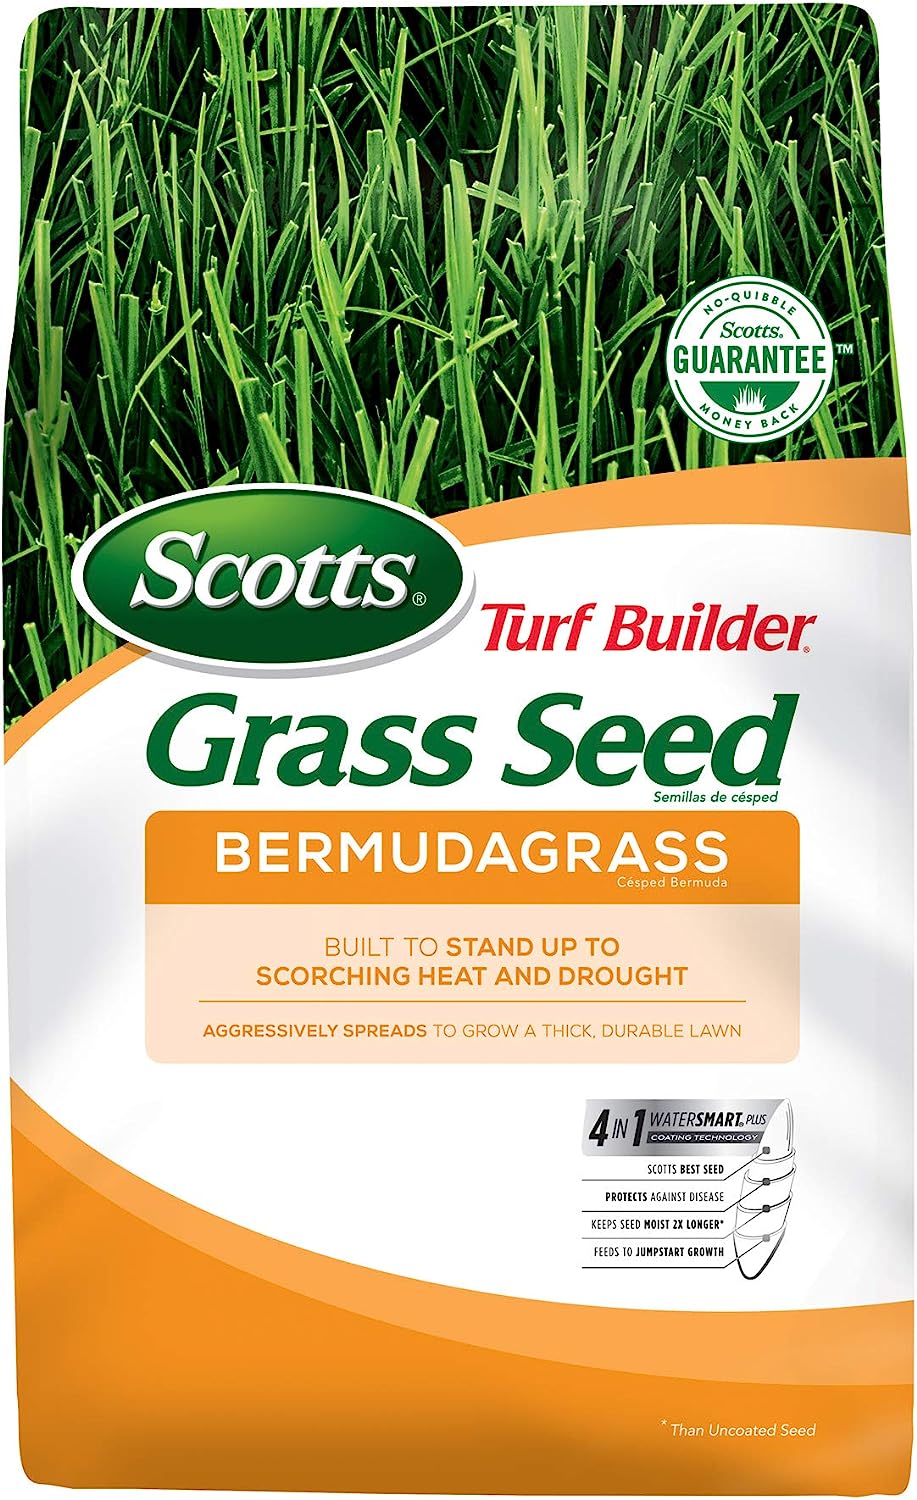 Scotts Turf Builder Grass Seed Bermudagrass, Mix for [...]